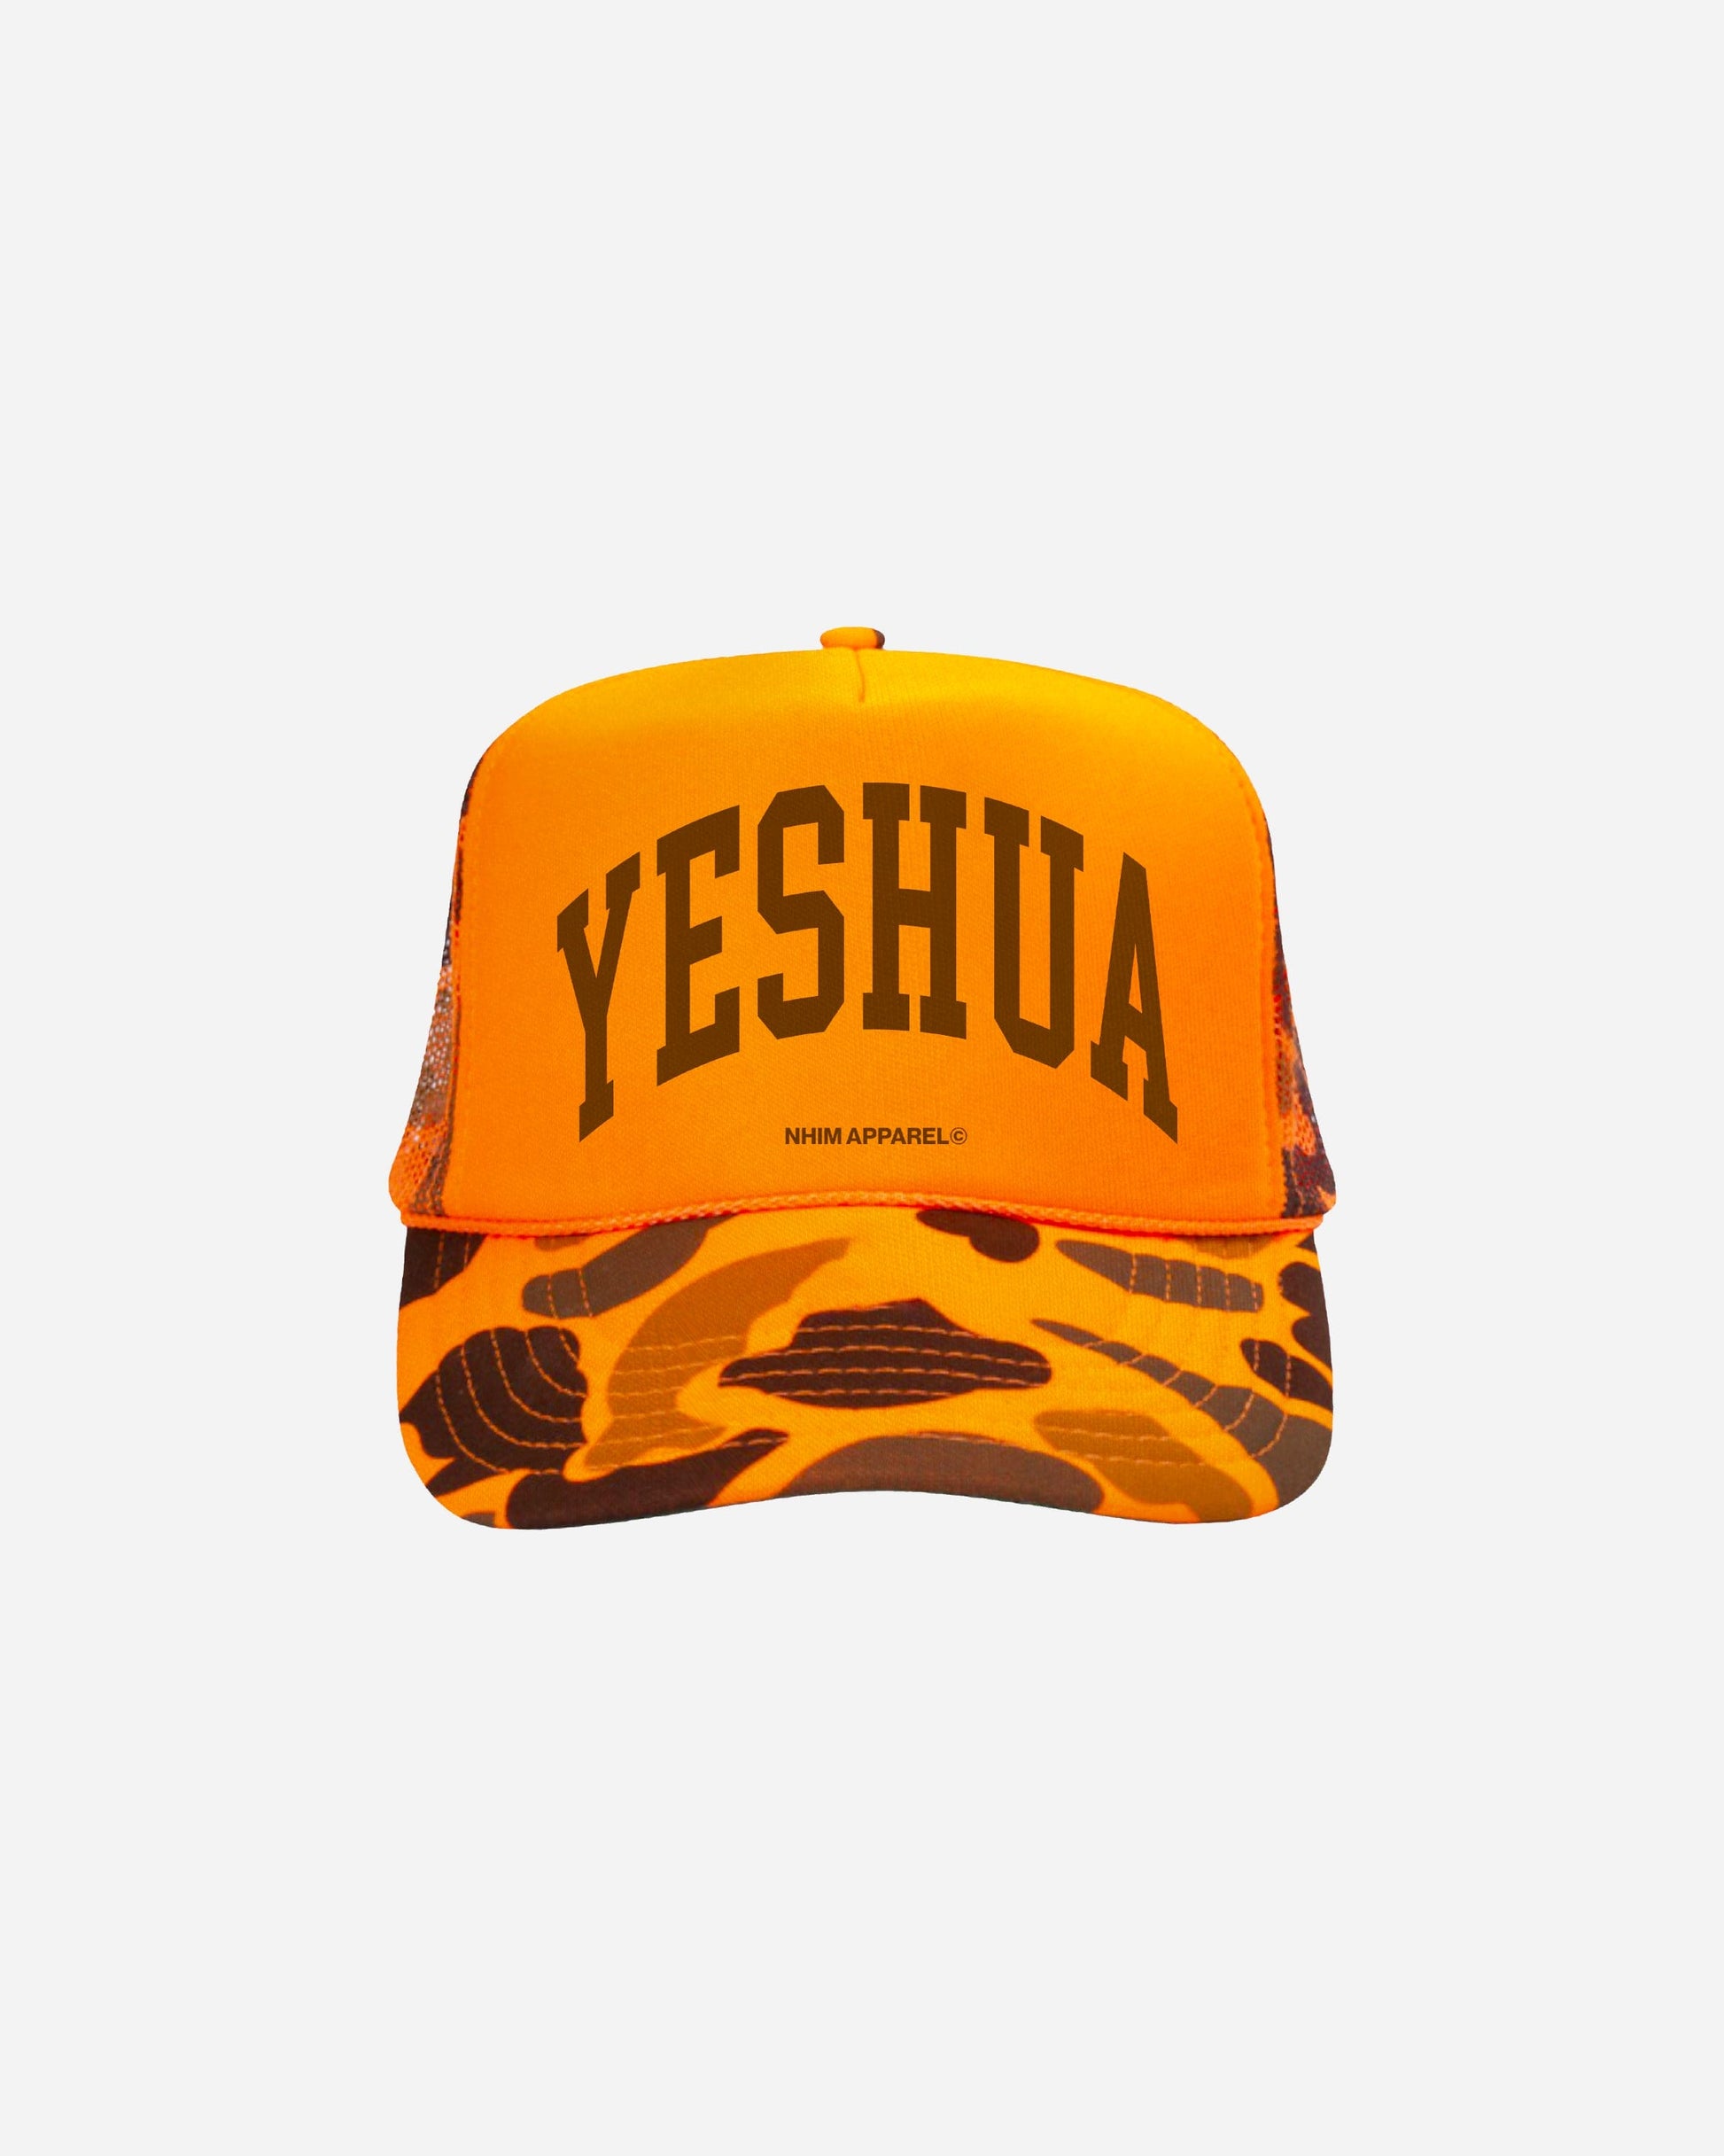 YESHUA Christian trucker hat from NHIM Apparel Christian Clothing Brand, hunter orange camo hat with brown writing